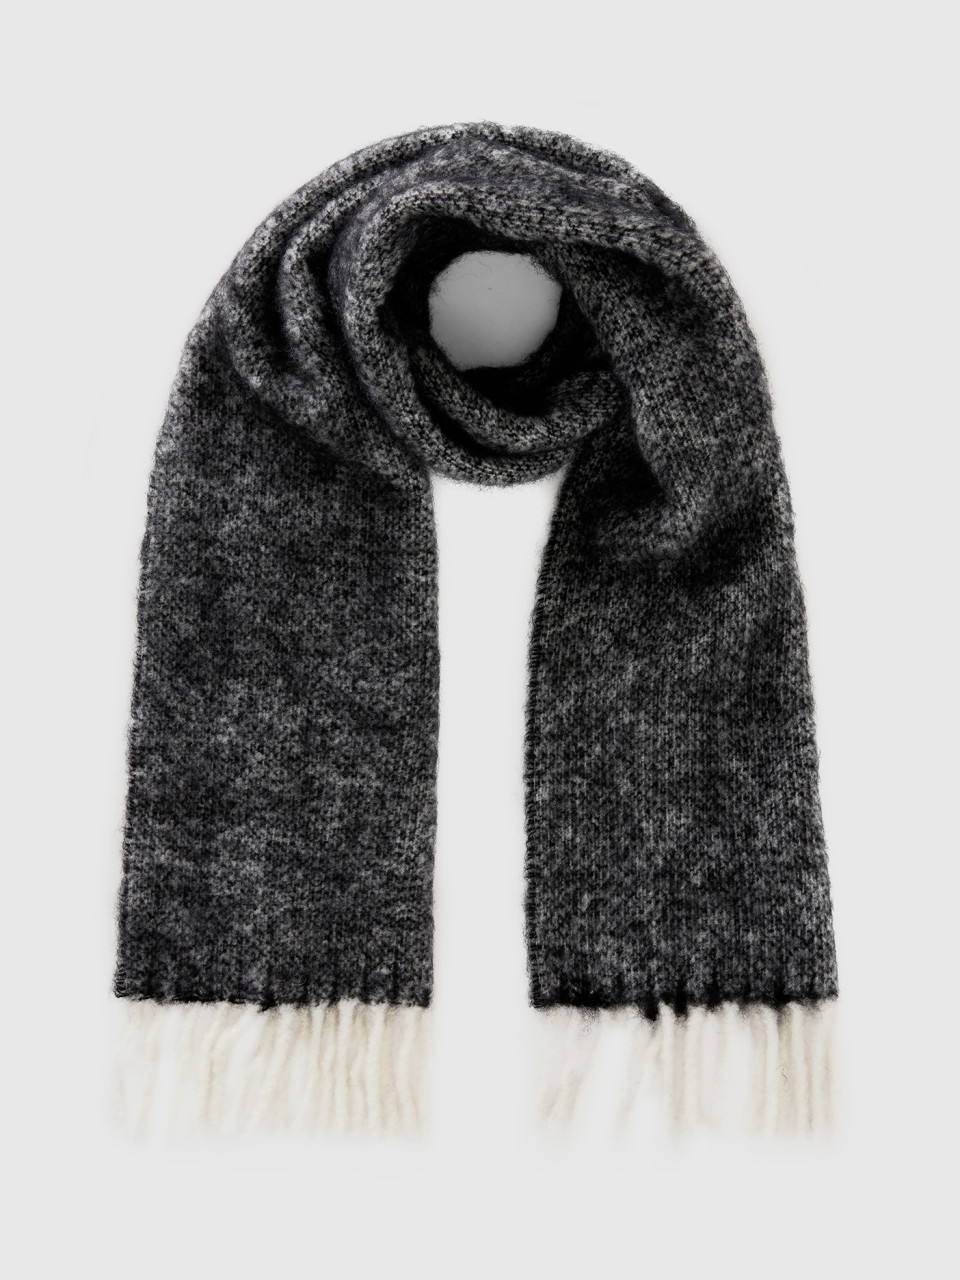 Benetton, Scarf In Recycled Fabric And Wool Blend, Black, Women